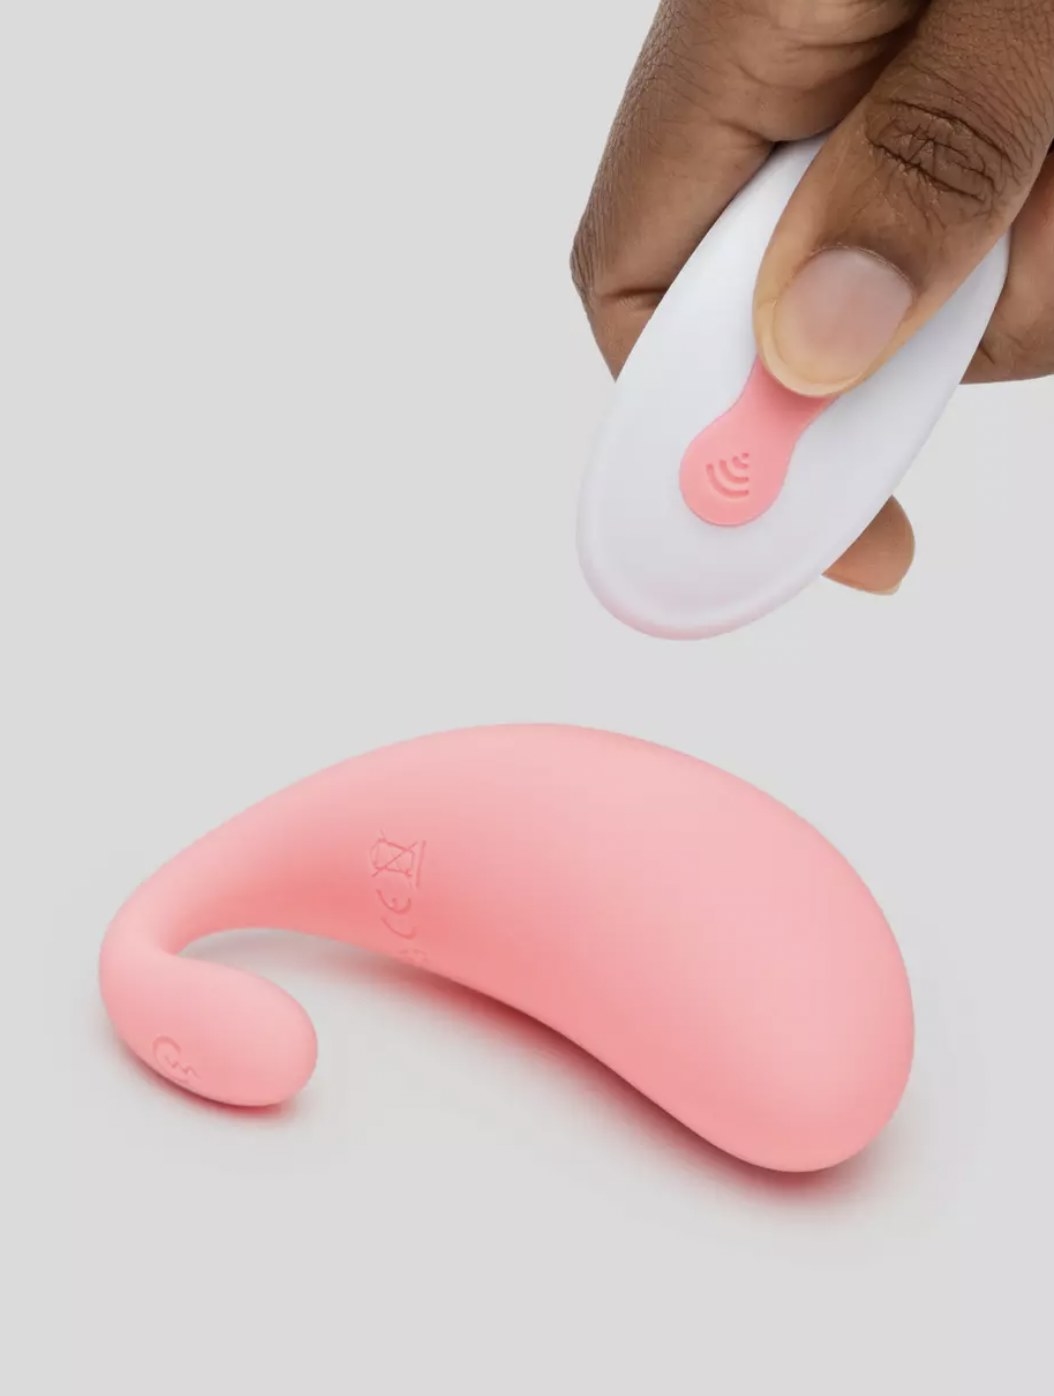 The pink vibrator with someone pressing remote control